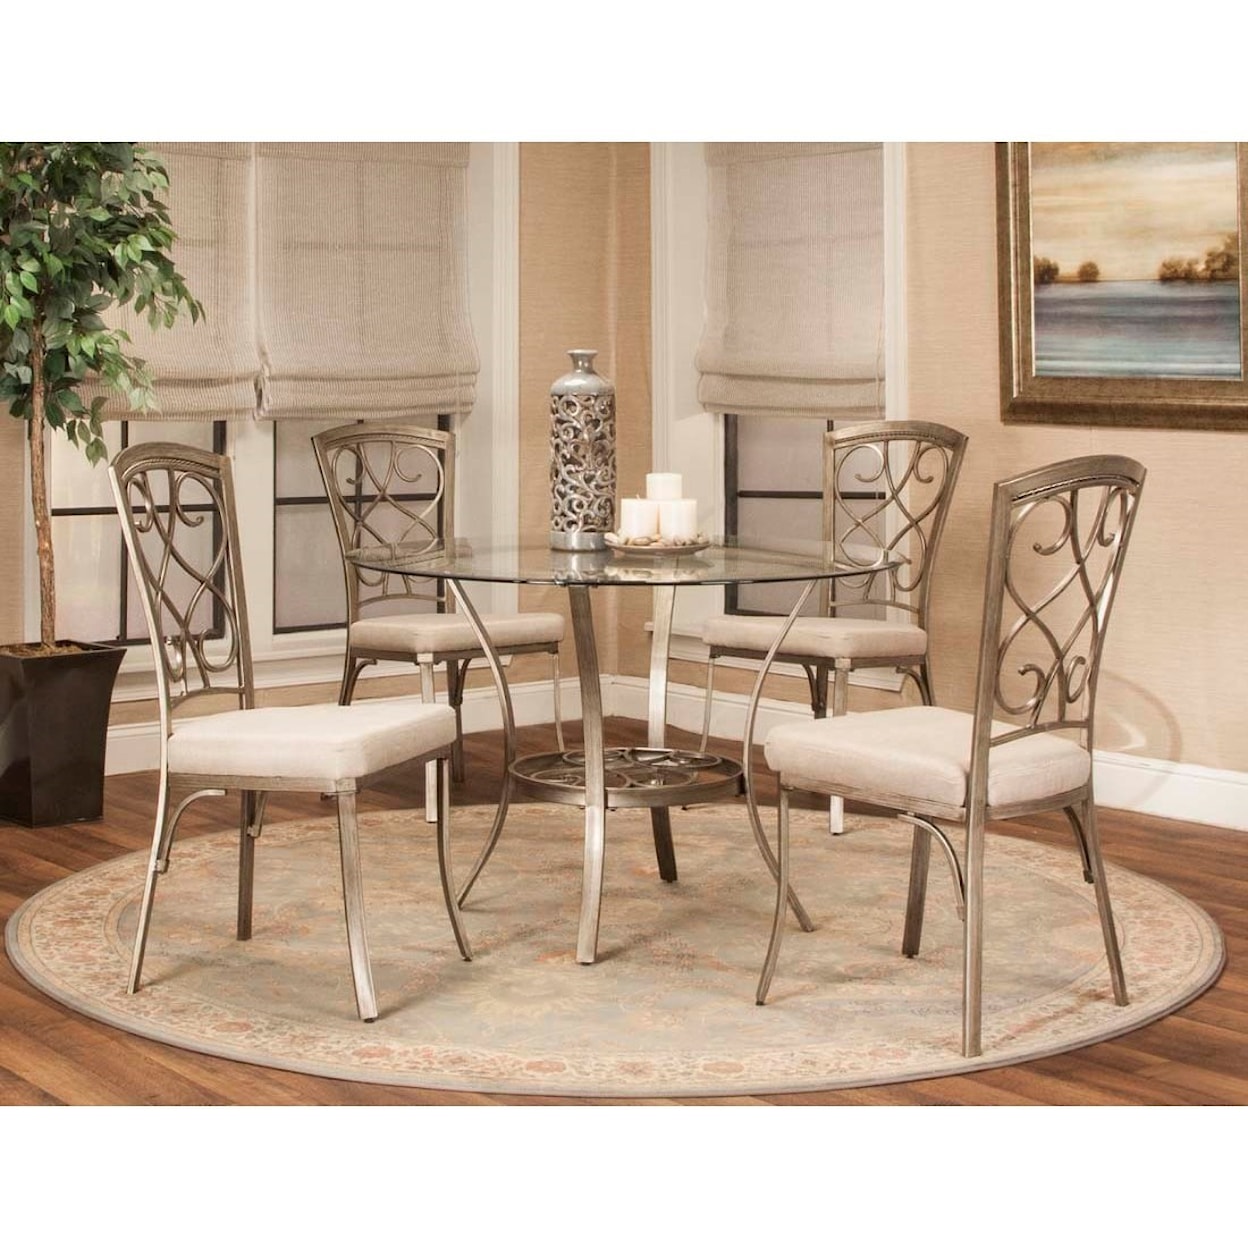 Cramco, Inc Asti 5-Piece Table and Chair Set